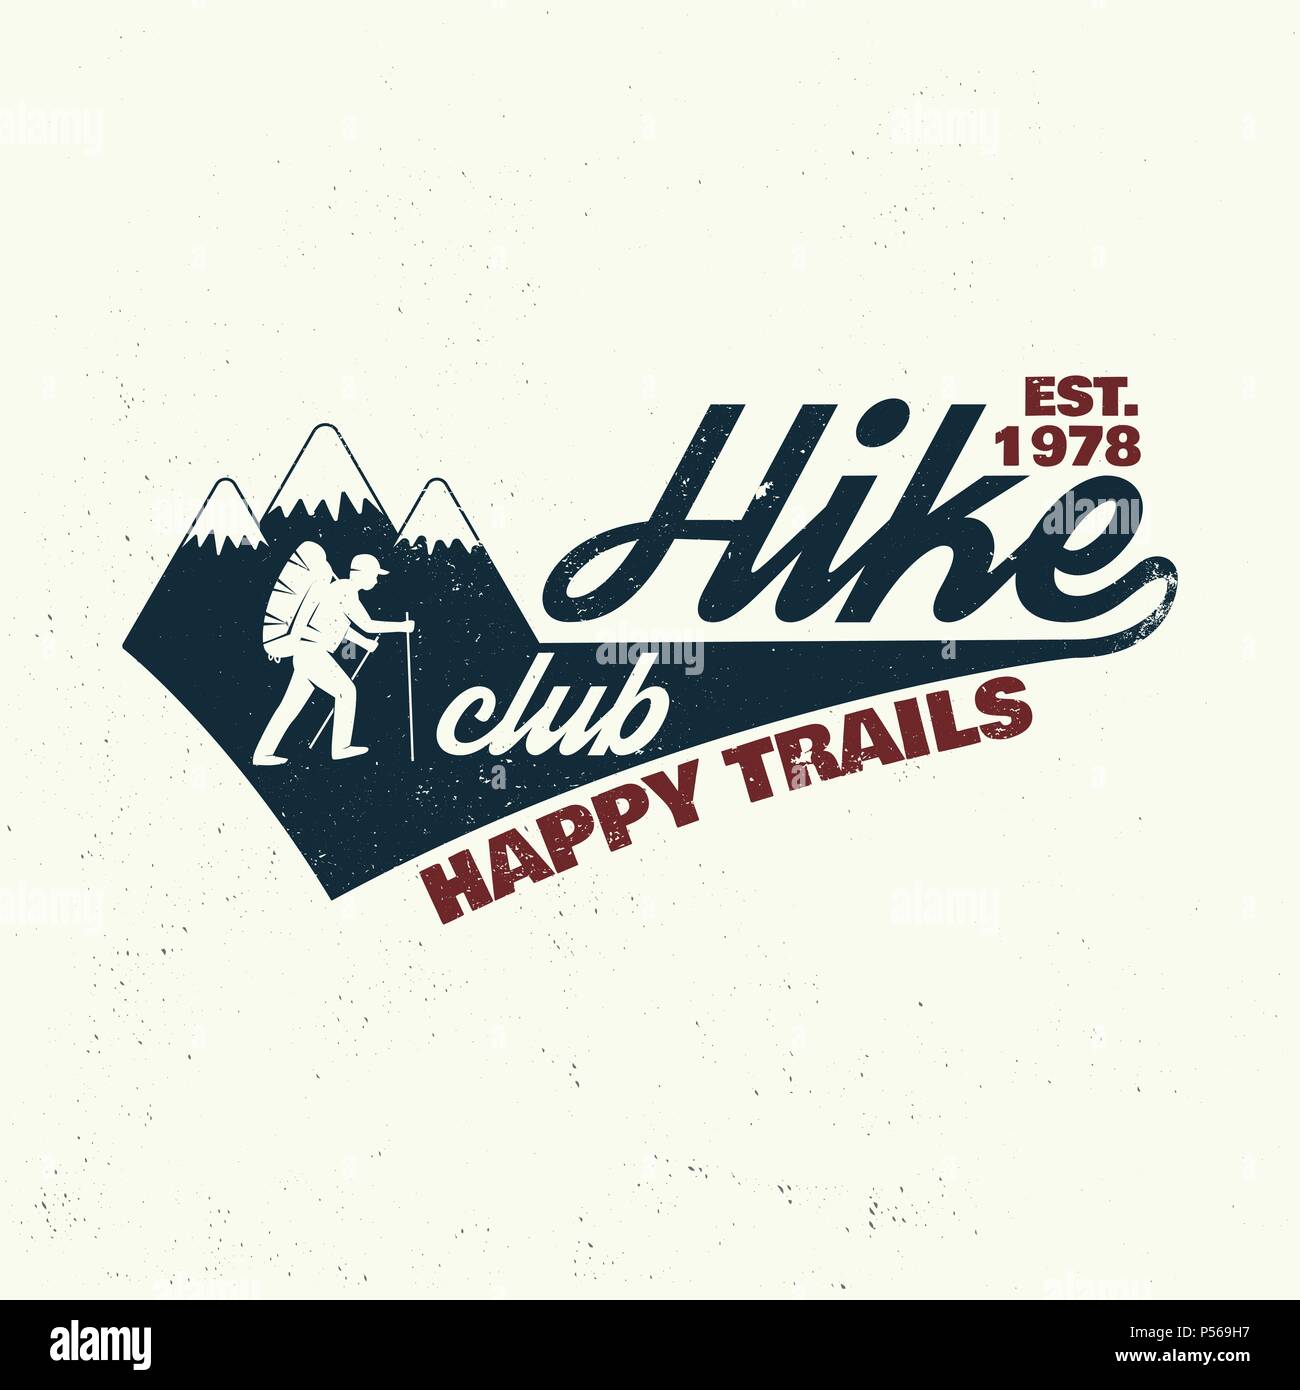 Hike club Happy trails. Vector illustration. Concept for shirt or logo, print, stamp. Design with hiker on the mountains. Stock Vector